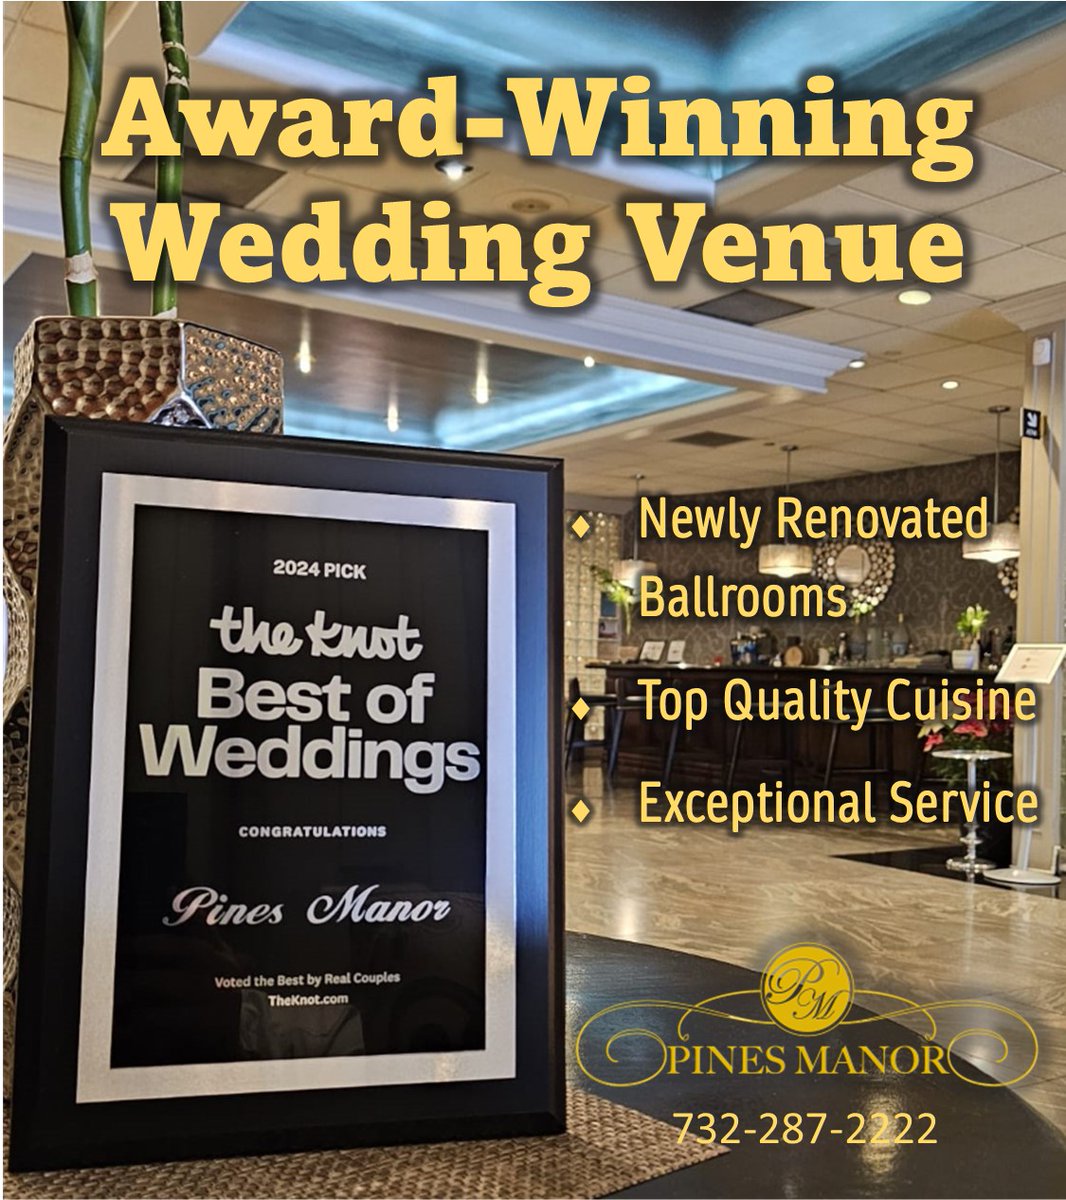 Book your spectacular #wedding #reception at the award-winning Pines Manor in #EdisonNJ, recipient of #TheKnot's Best of Weddings distinction. Make an appointment to see our newly renovated ballrooms - 732-287-2222 #WeddingVenue #CateringHall